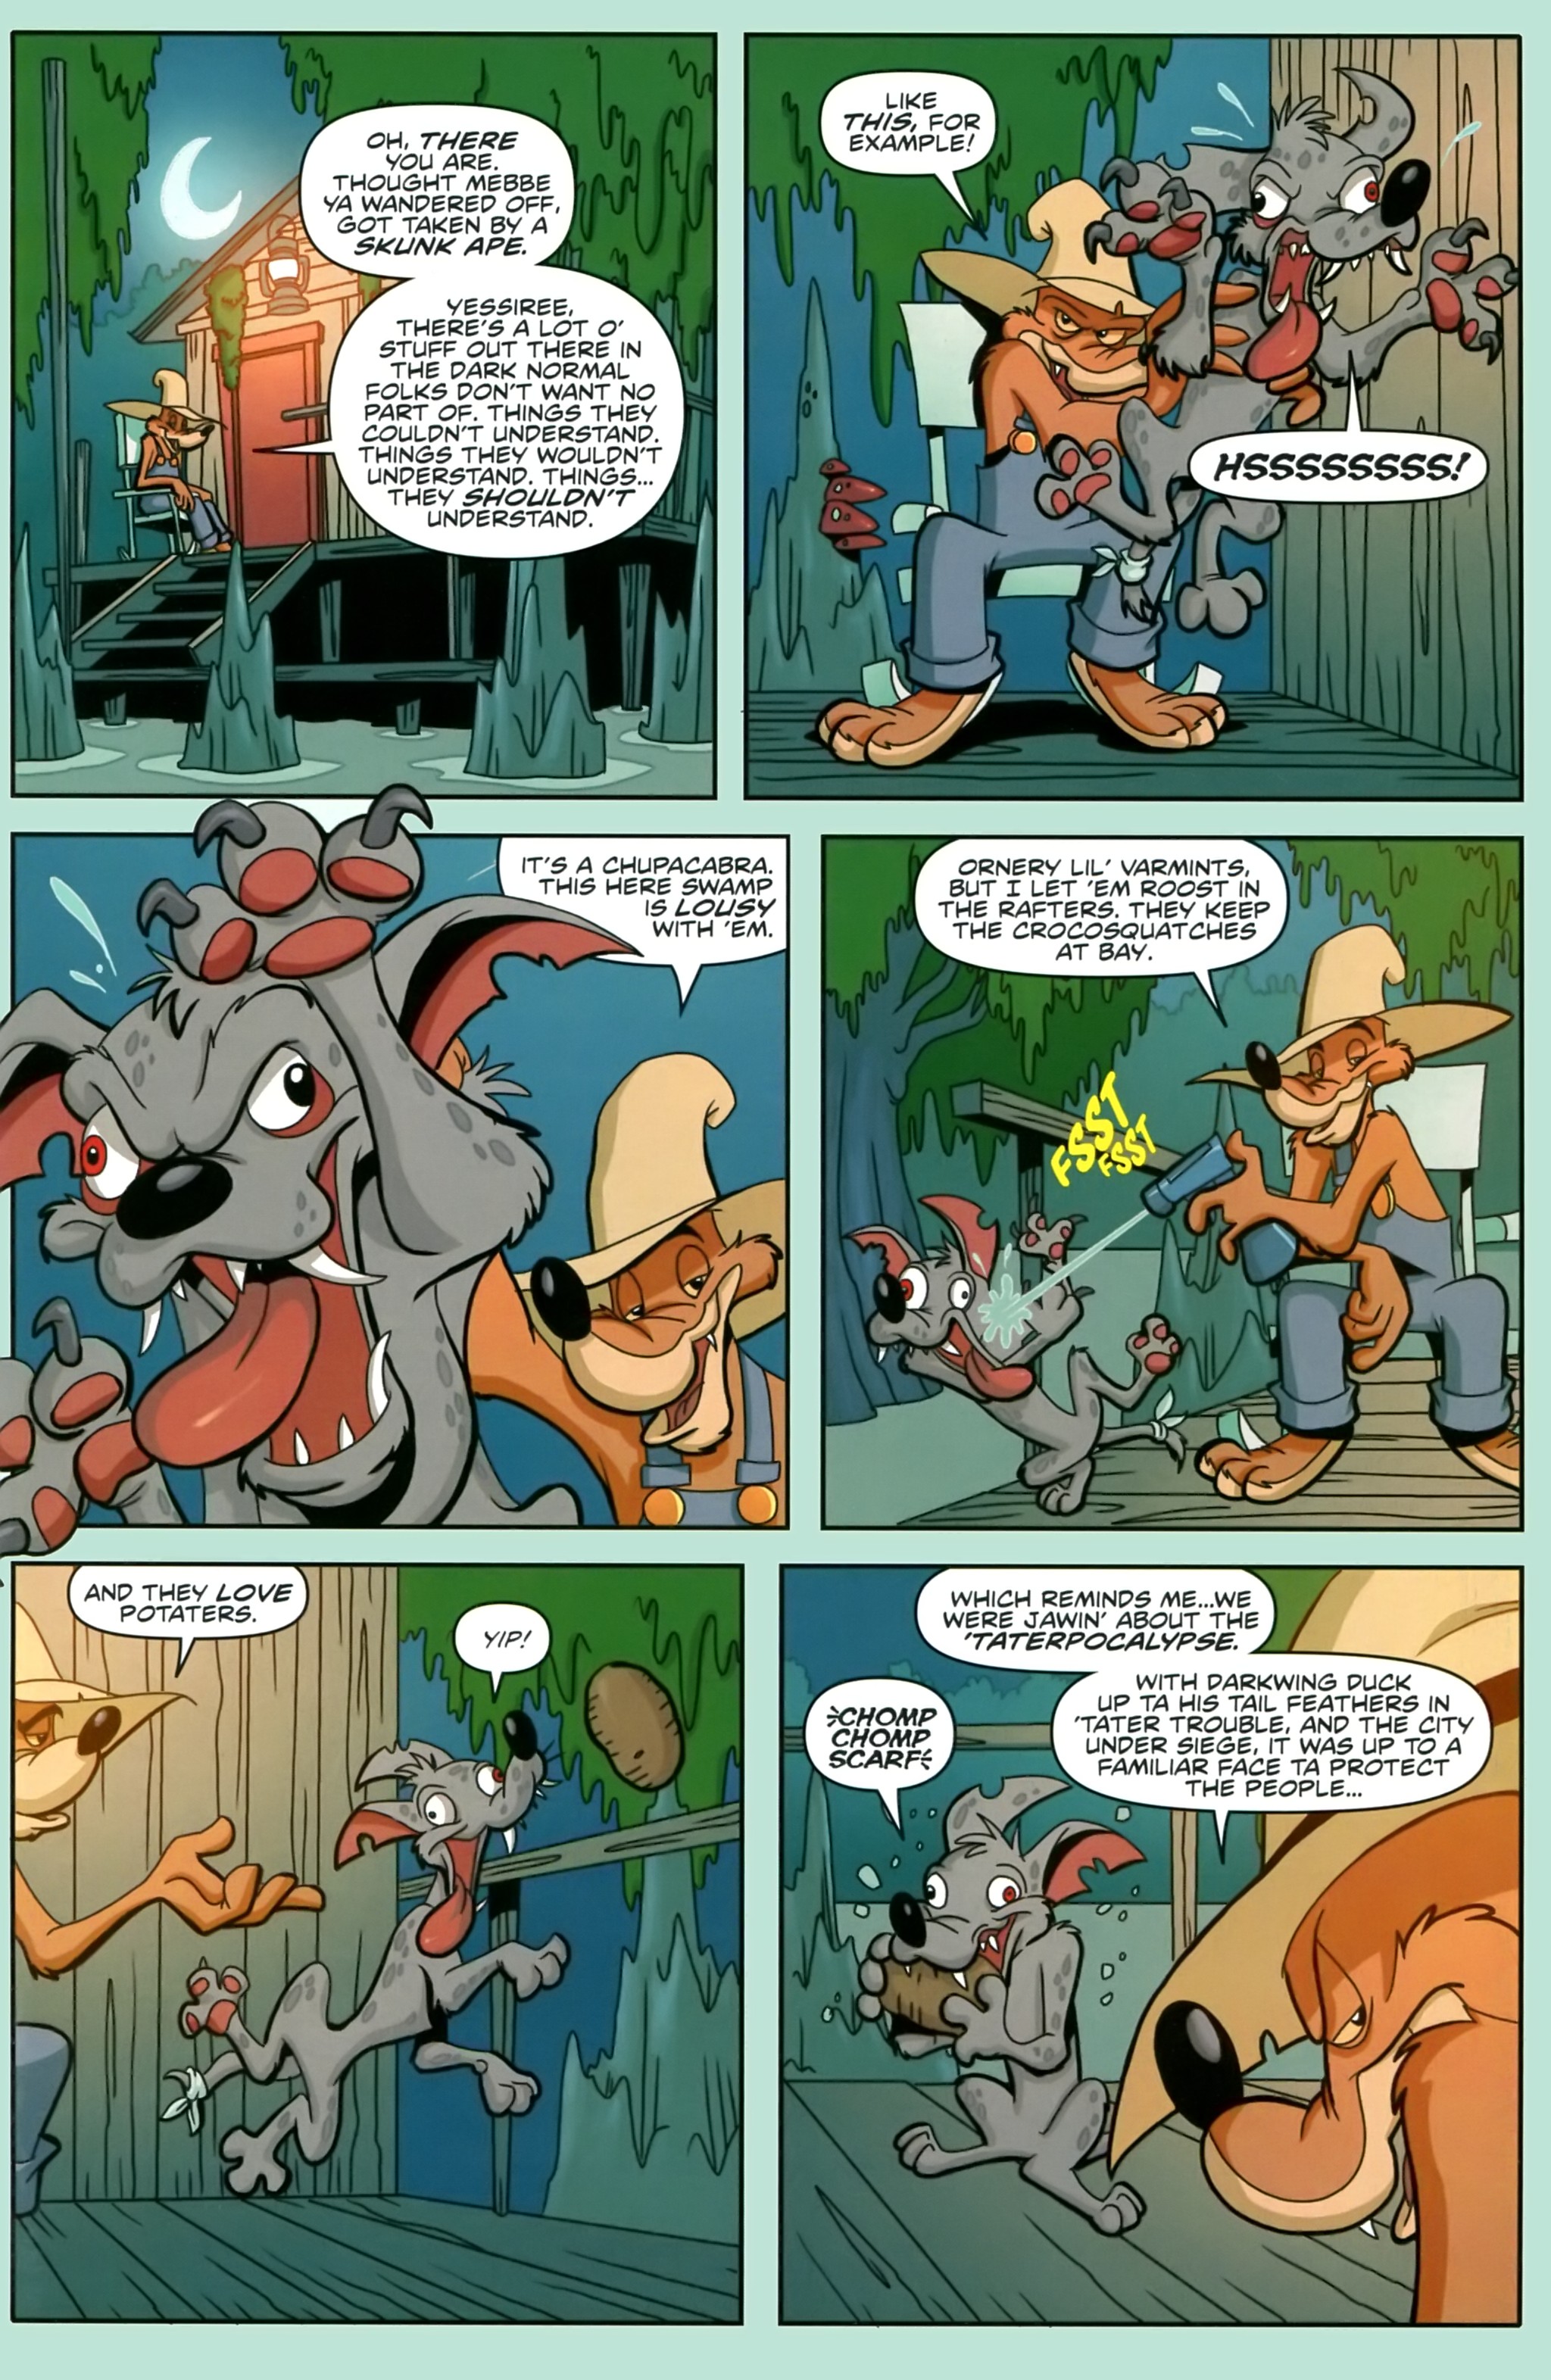 Disney Darkwing Duck (2016-): Chapter 8 - Page 3